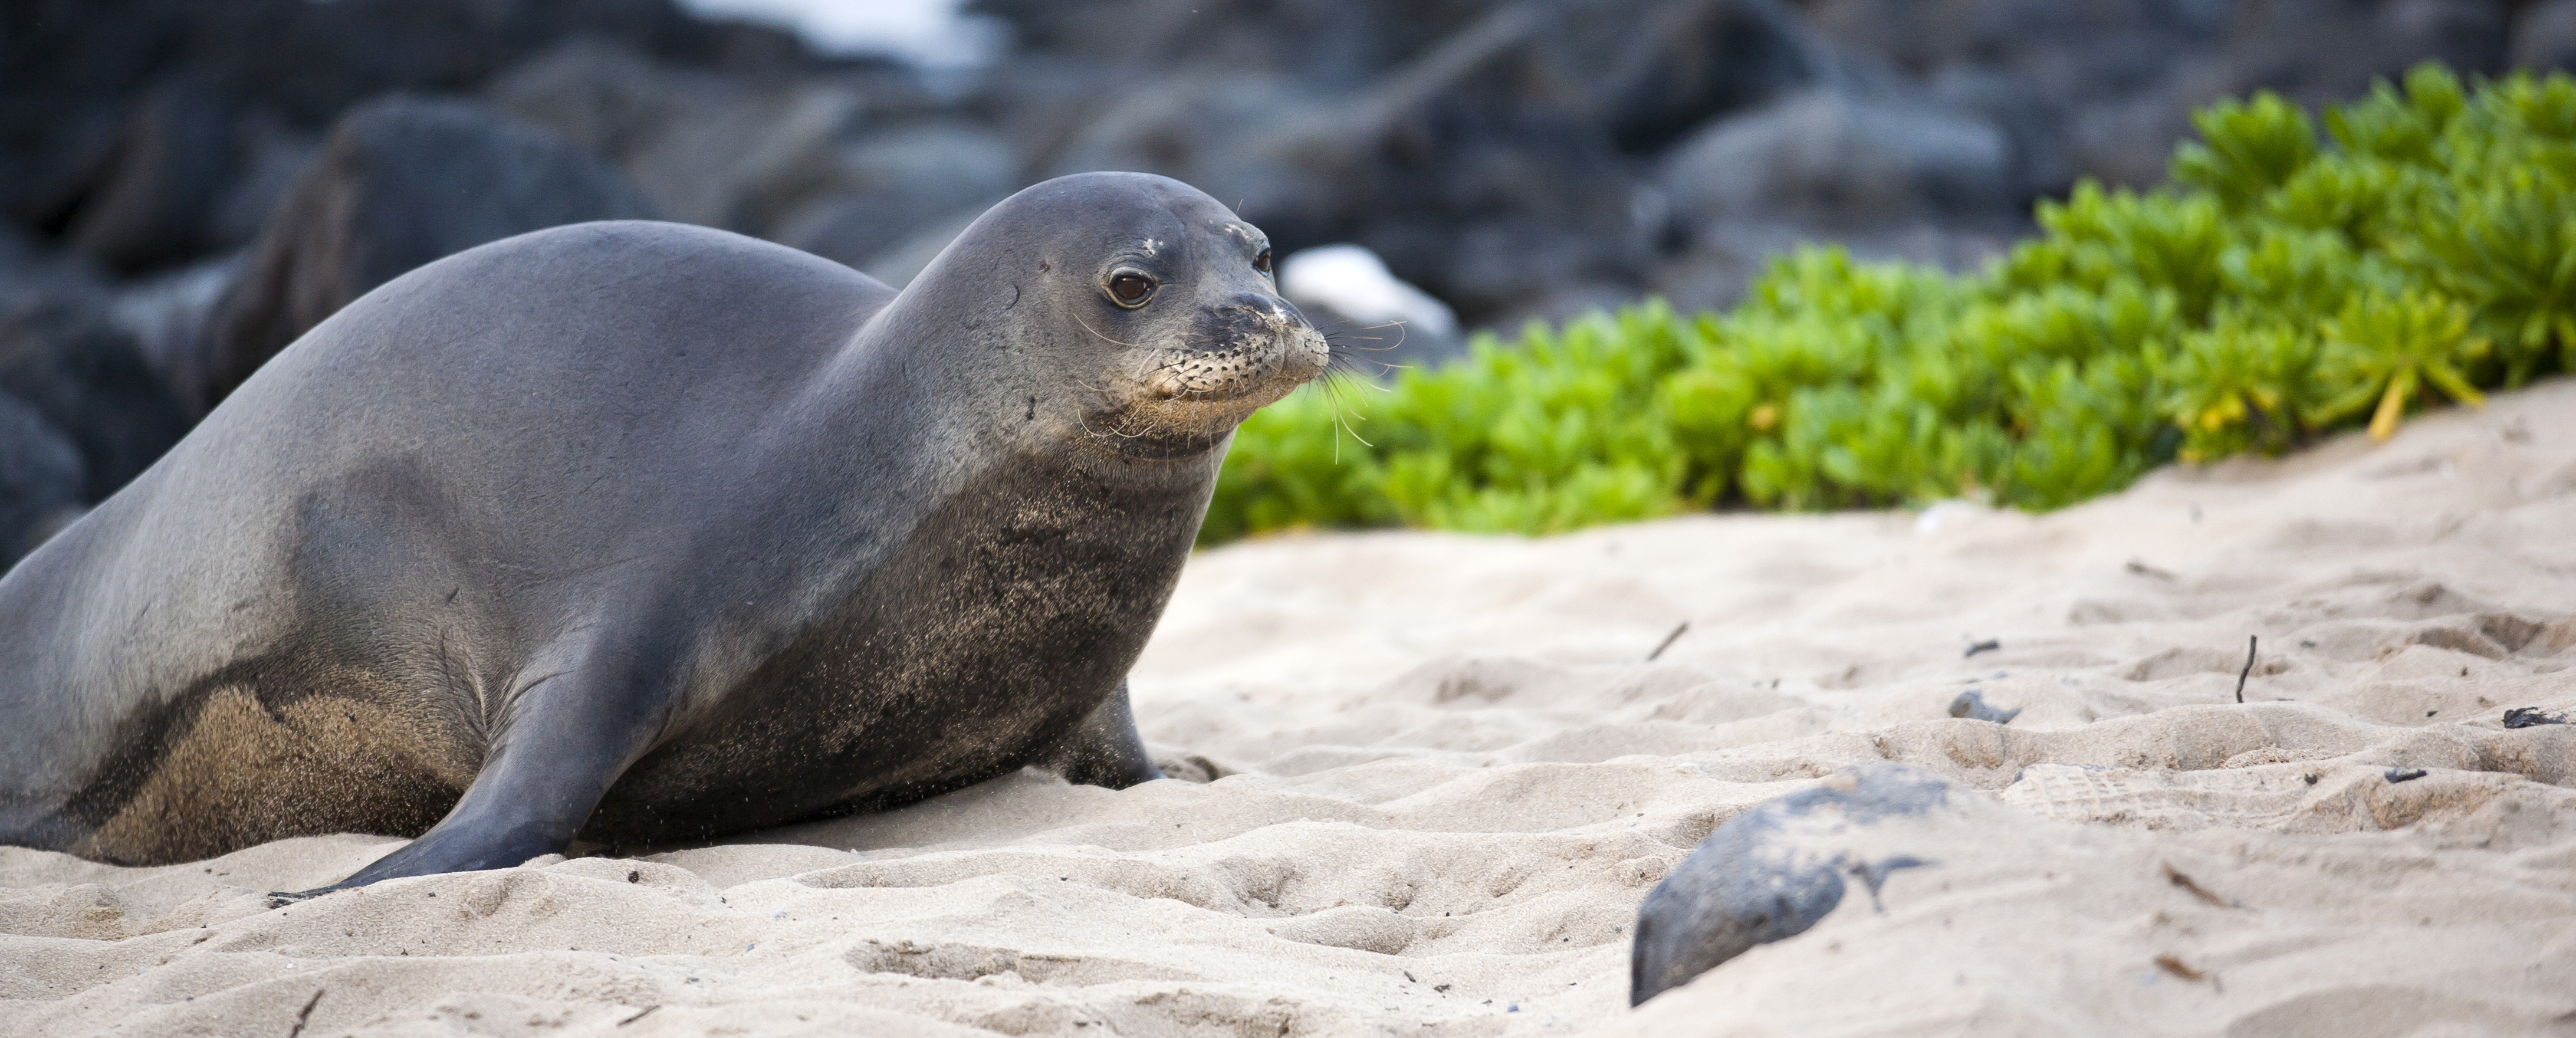 “Monk Seal 06” by PhotoBobil. Licensed under CC BY 2.0.